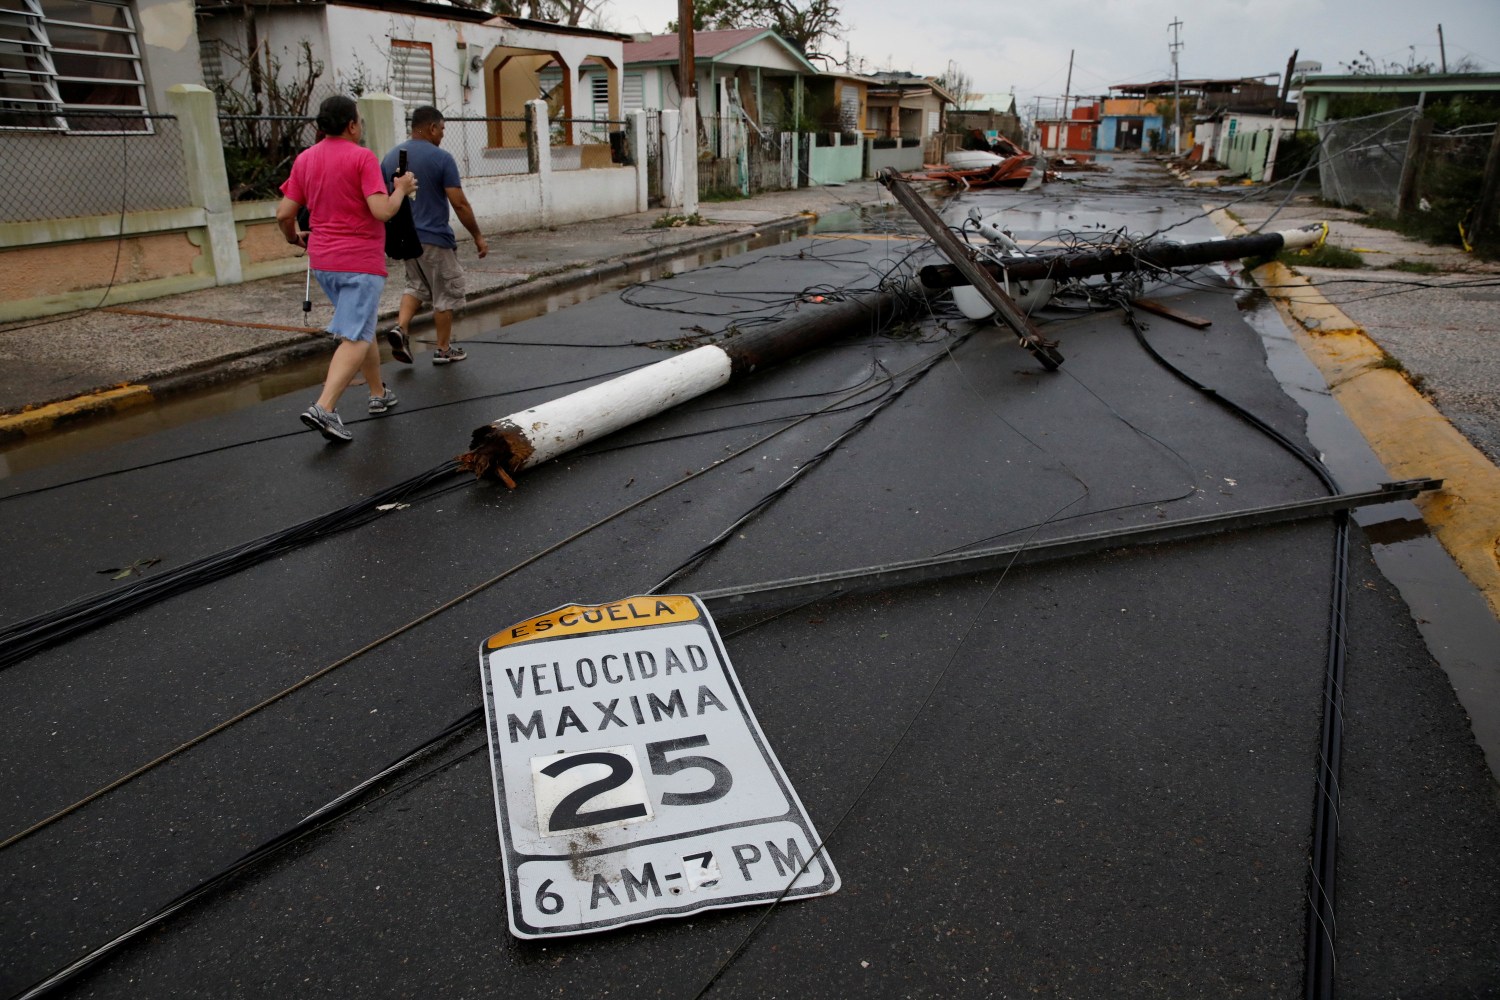 Photo: People walk next to fallen electric poles and traffic sings after the area was hit by Hurricane Maria in Salinas, Puerto Rico, September 21, 2017. REUTERS/Carlos Garcia Rawlins